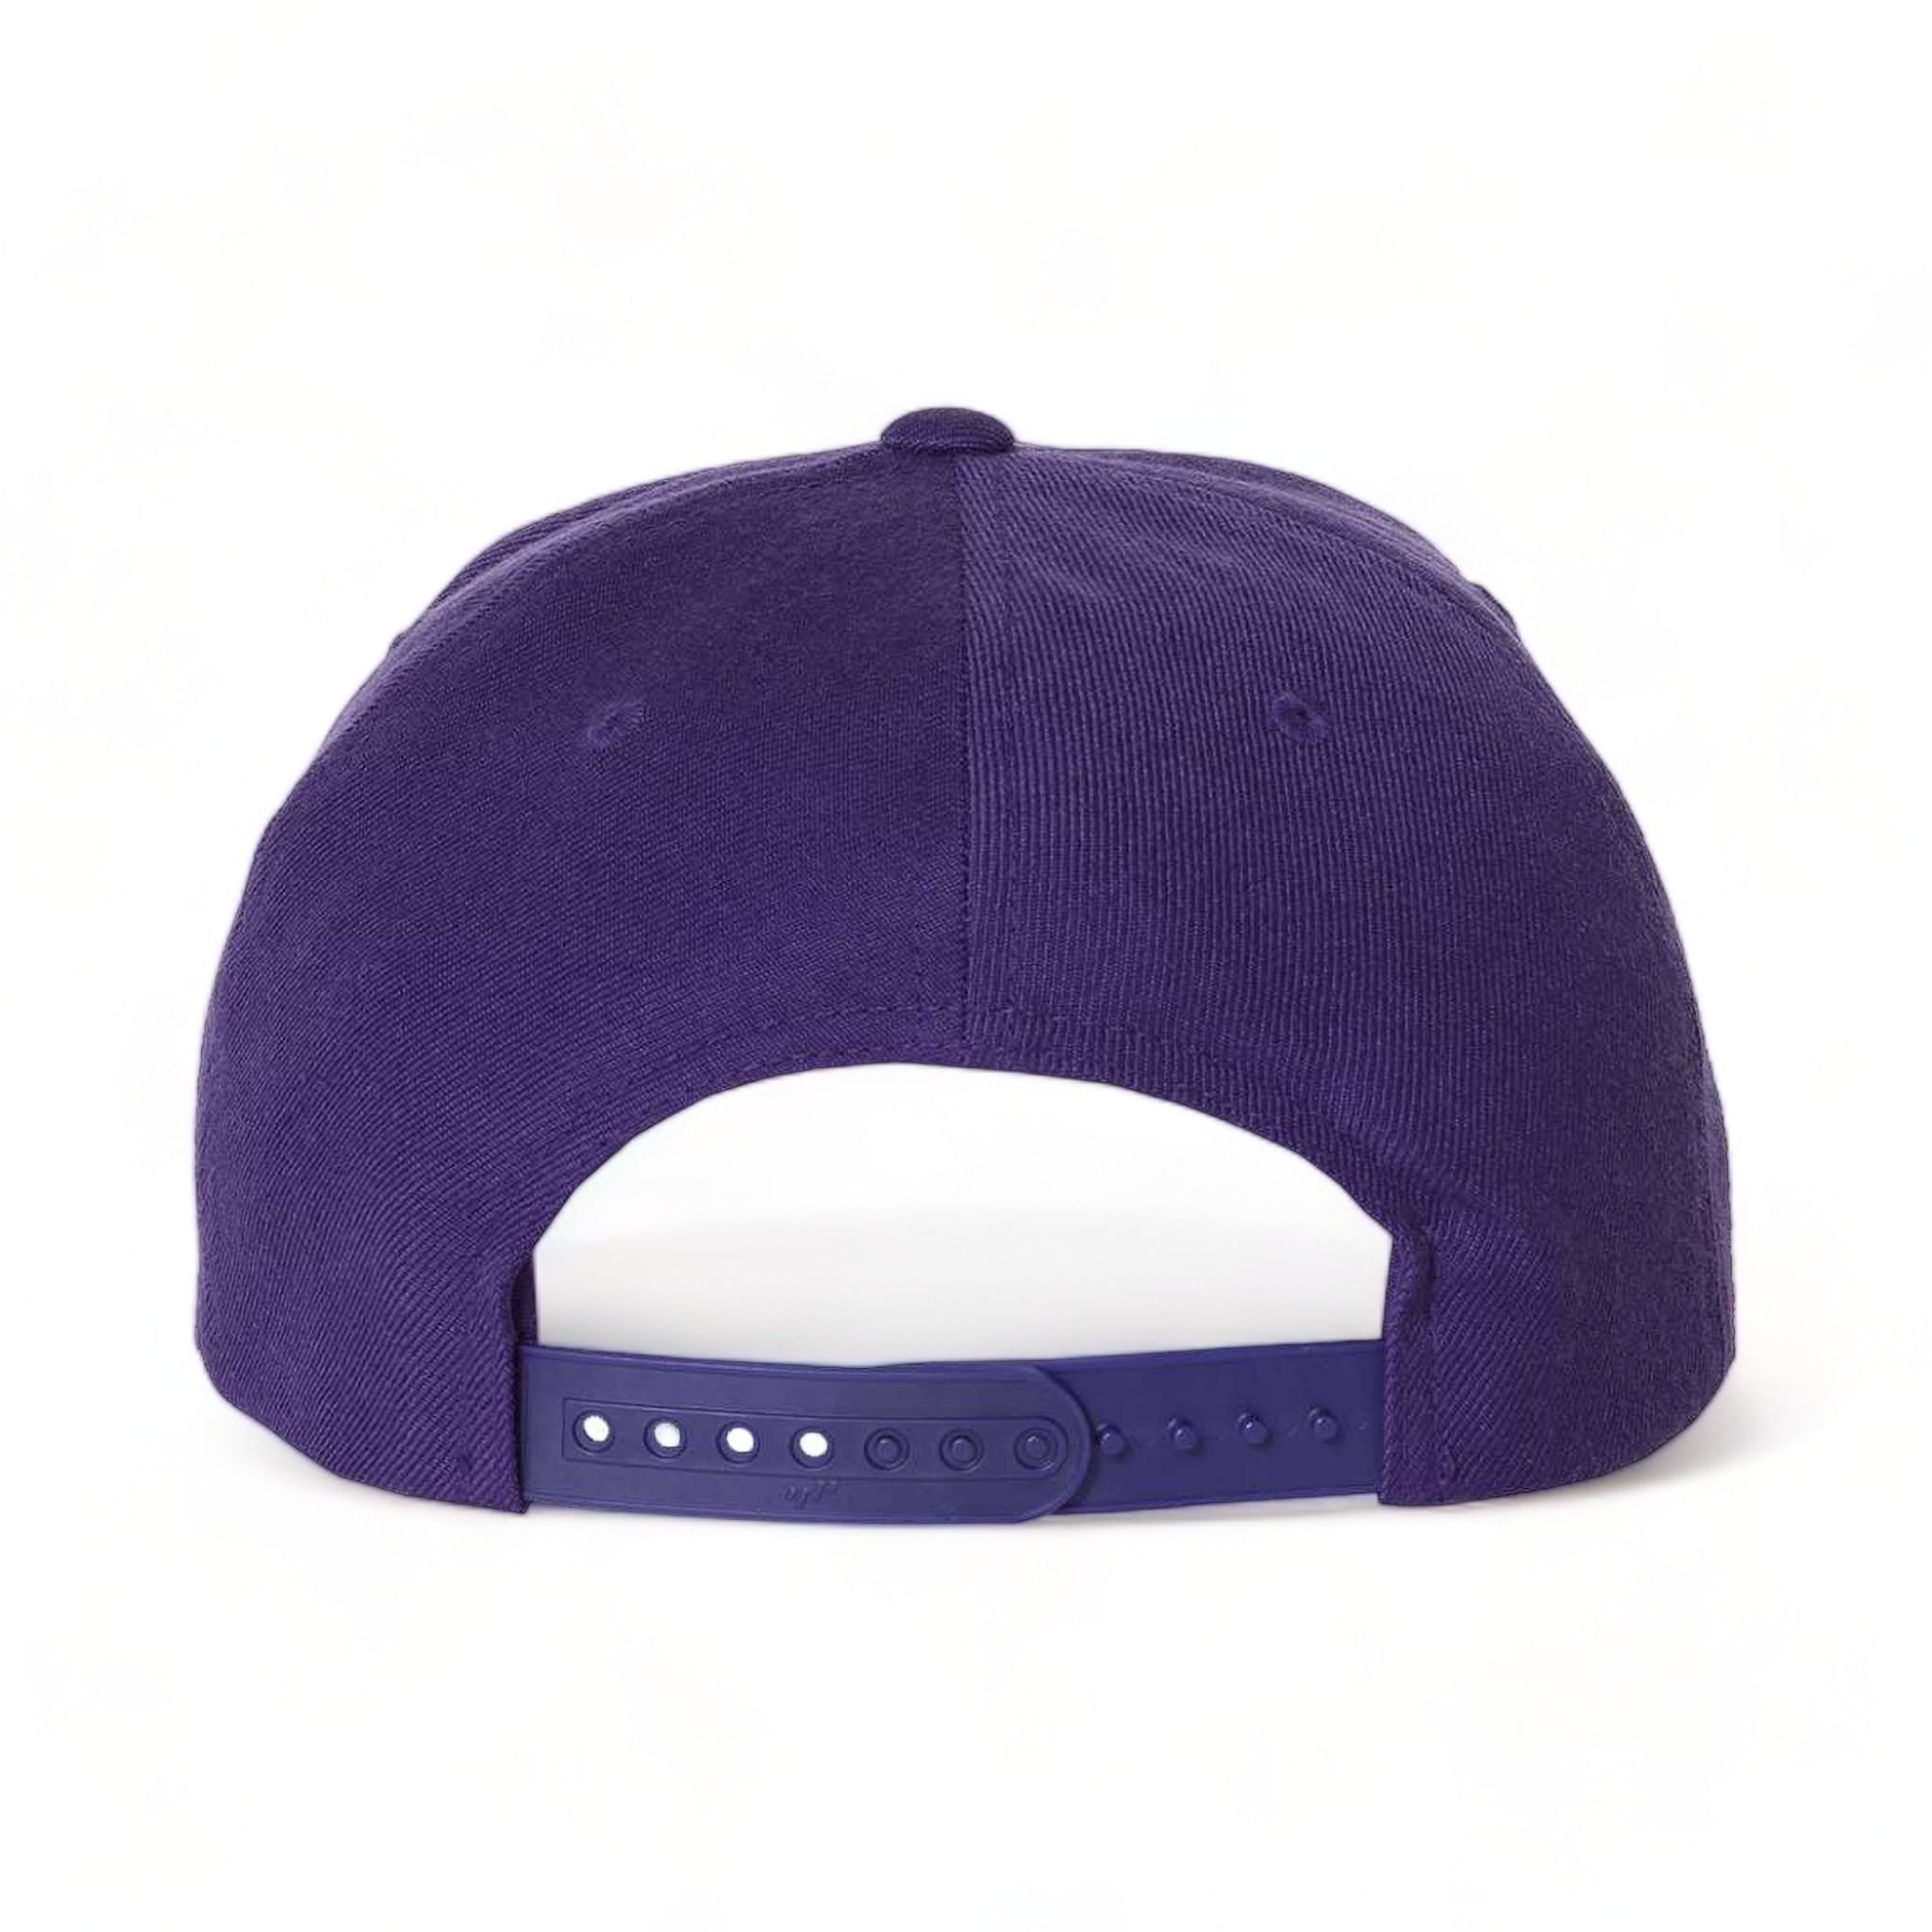 Back view of YP Classics 6089M custom hat in purple